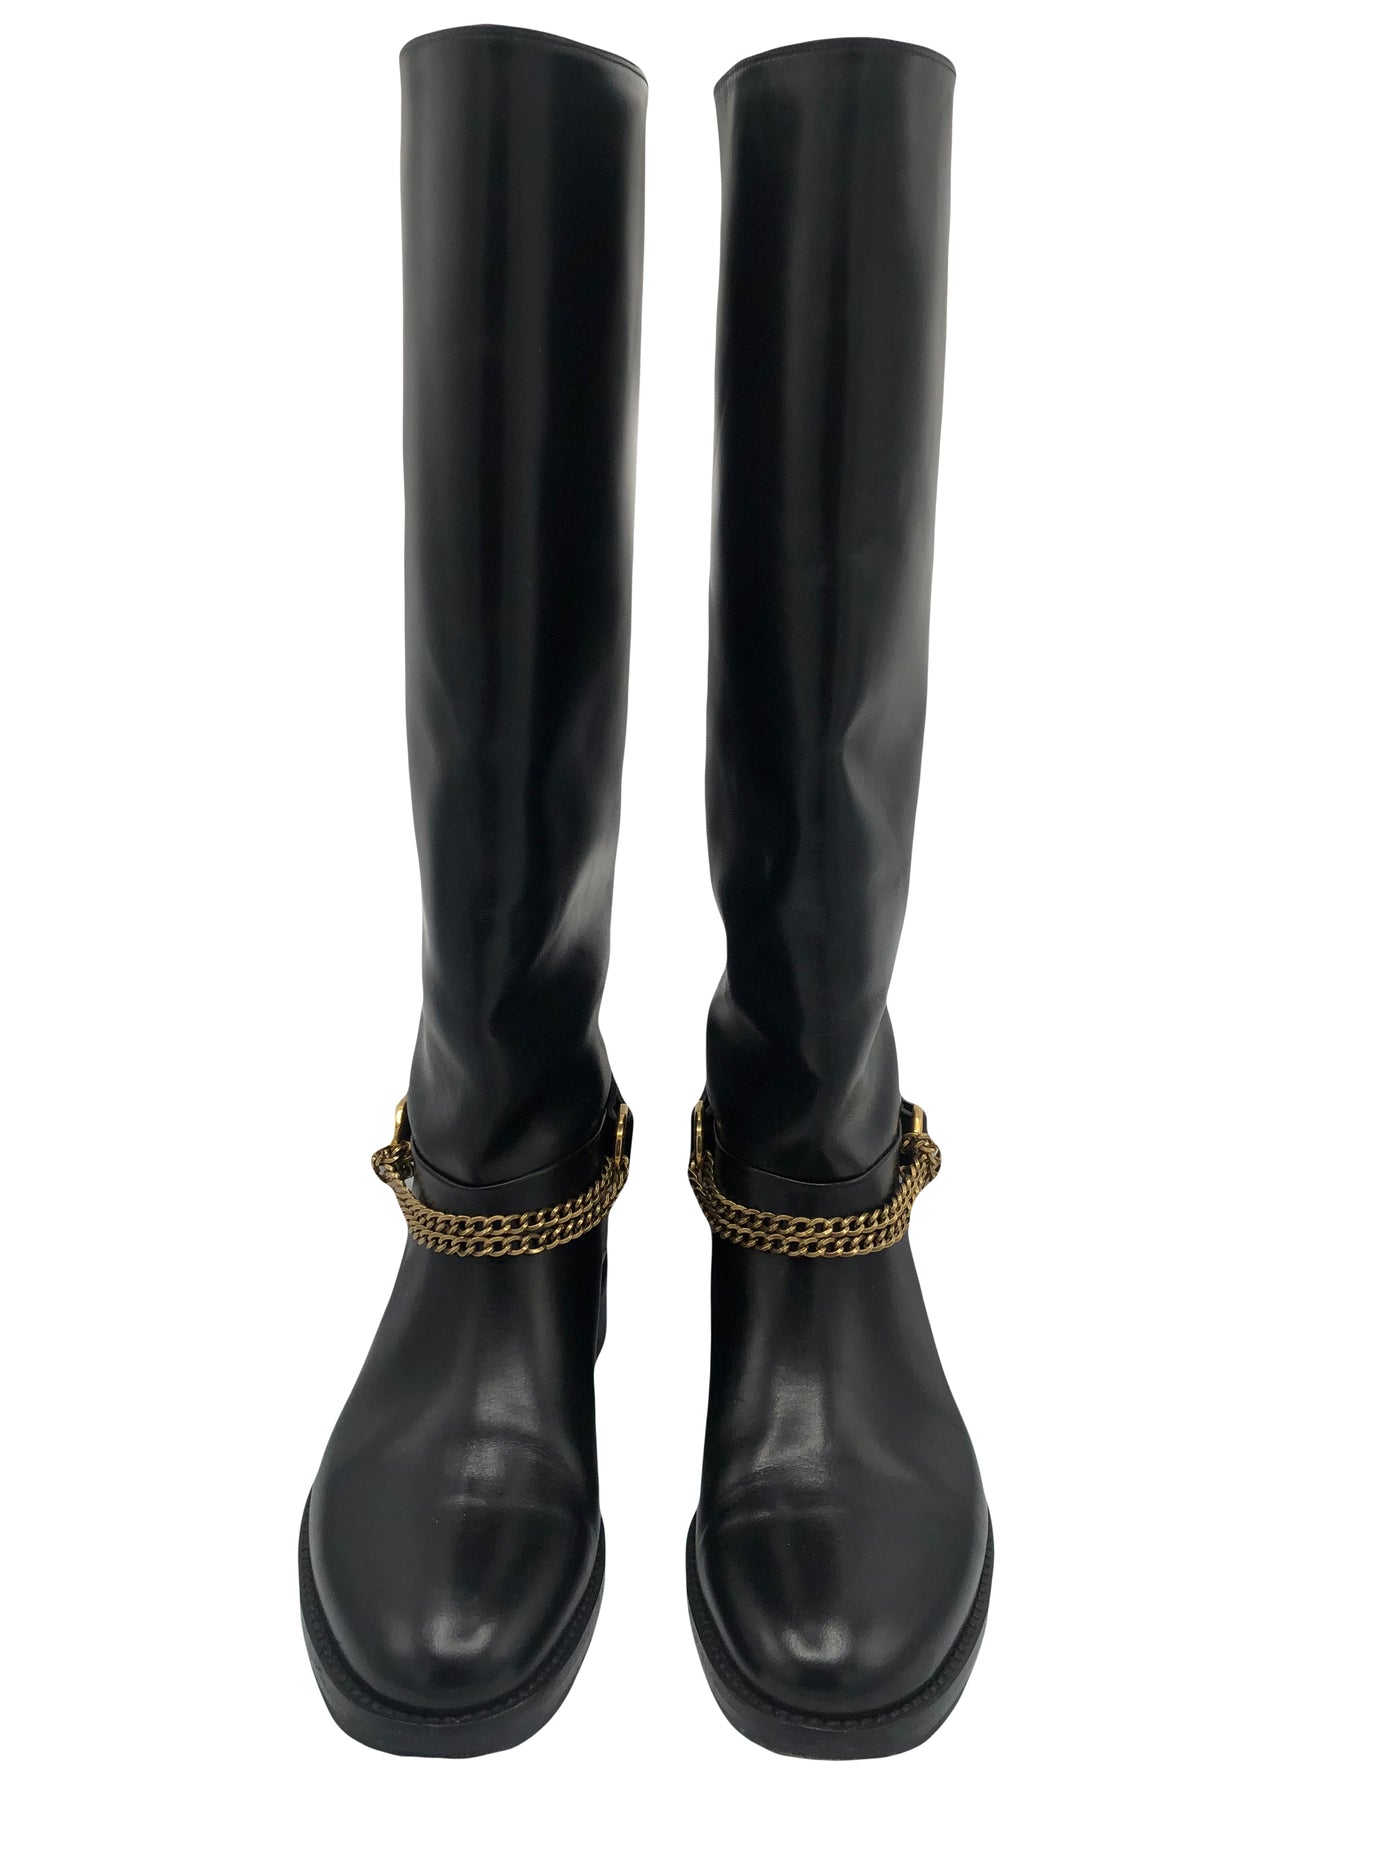 LANVIN leather riding boots with antique gold chain size 39